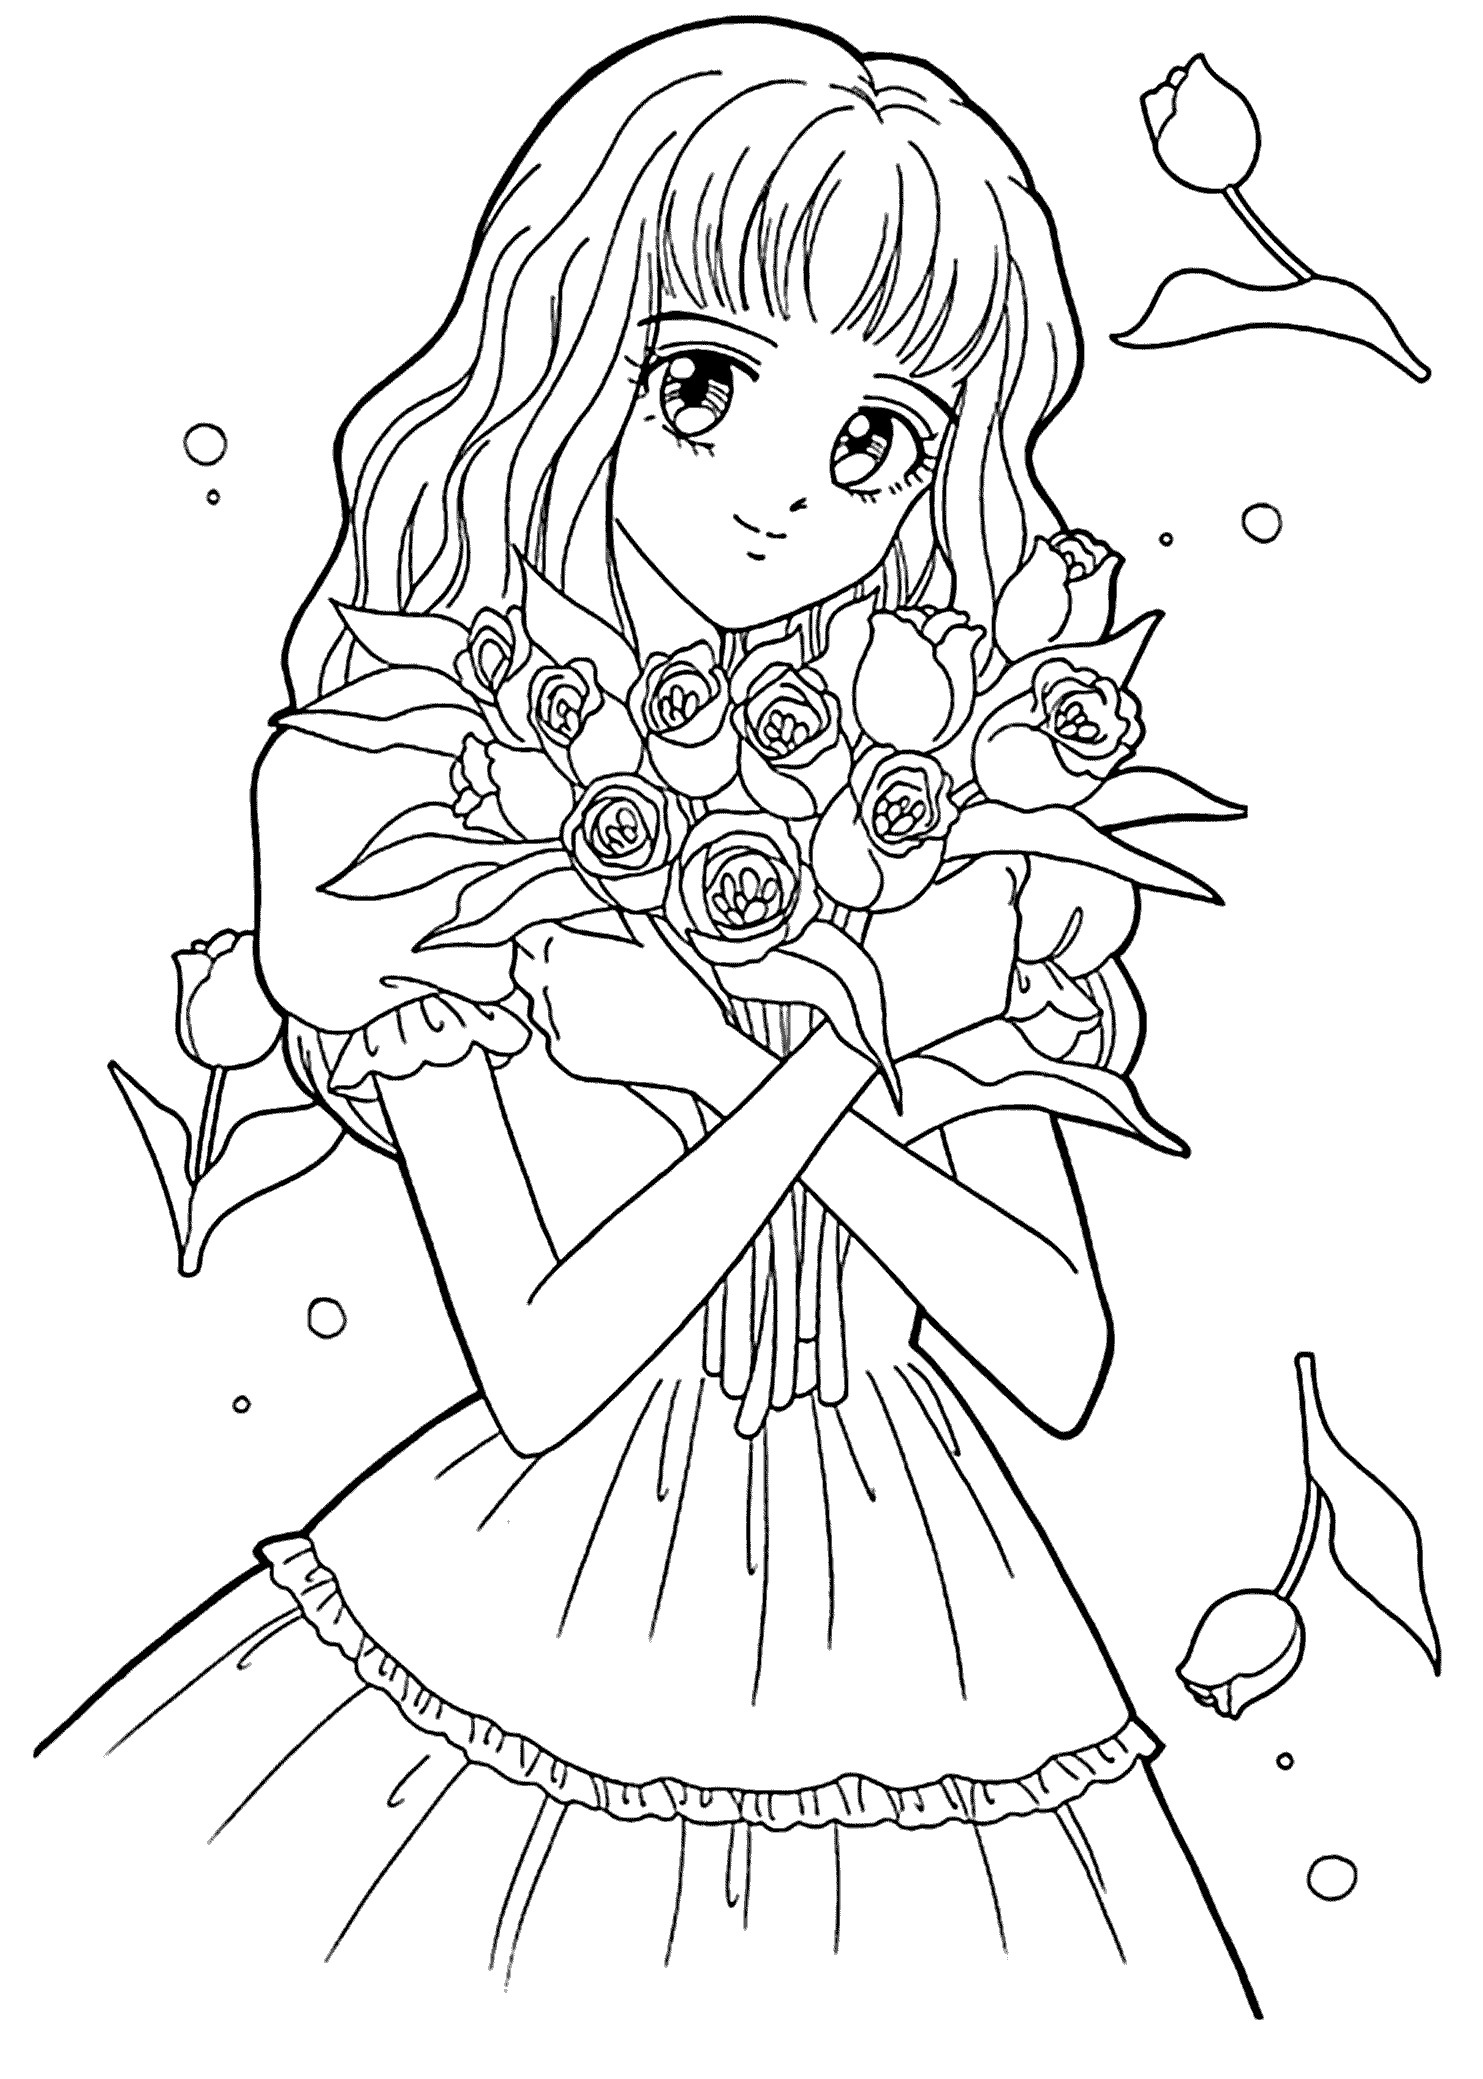 Free Coloring Pages Of Girls
 Best Free Printable Coloring Pages for Kids and Teens